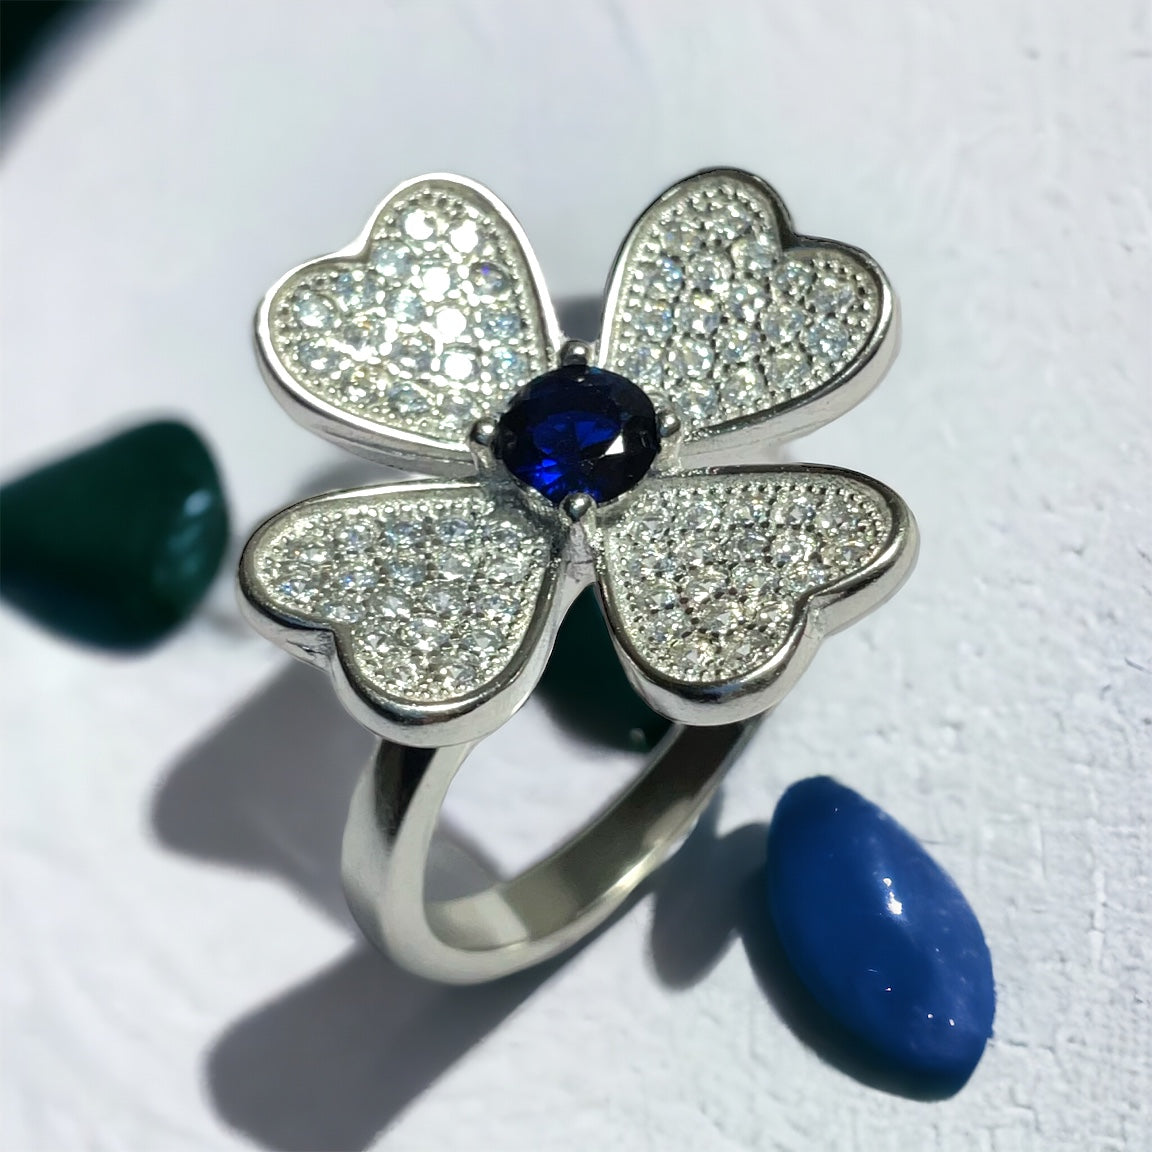 a ring with a blue stone in the middle of it